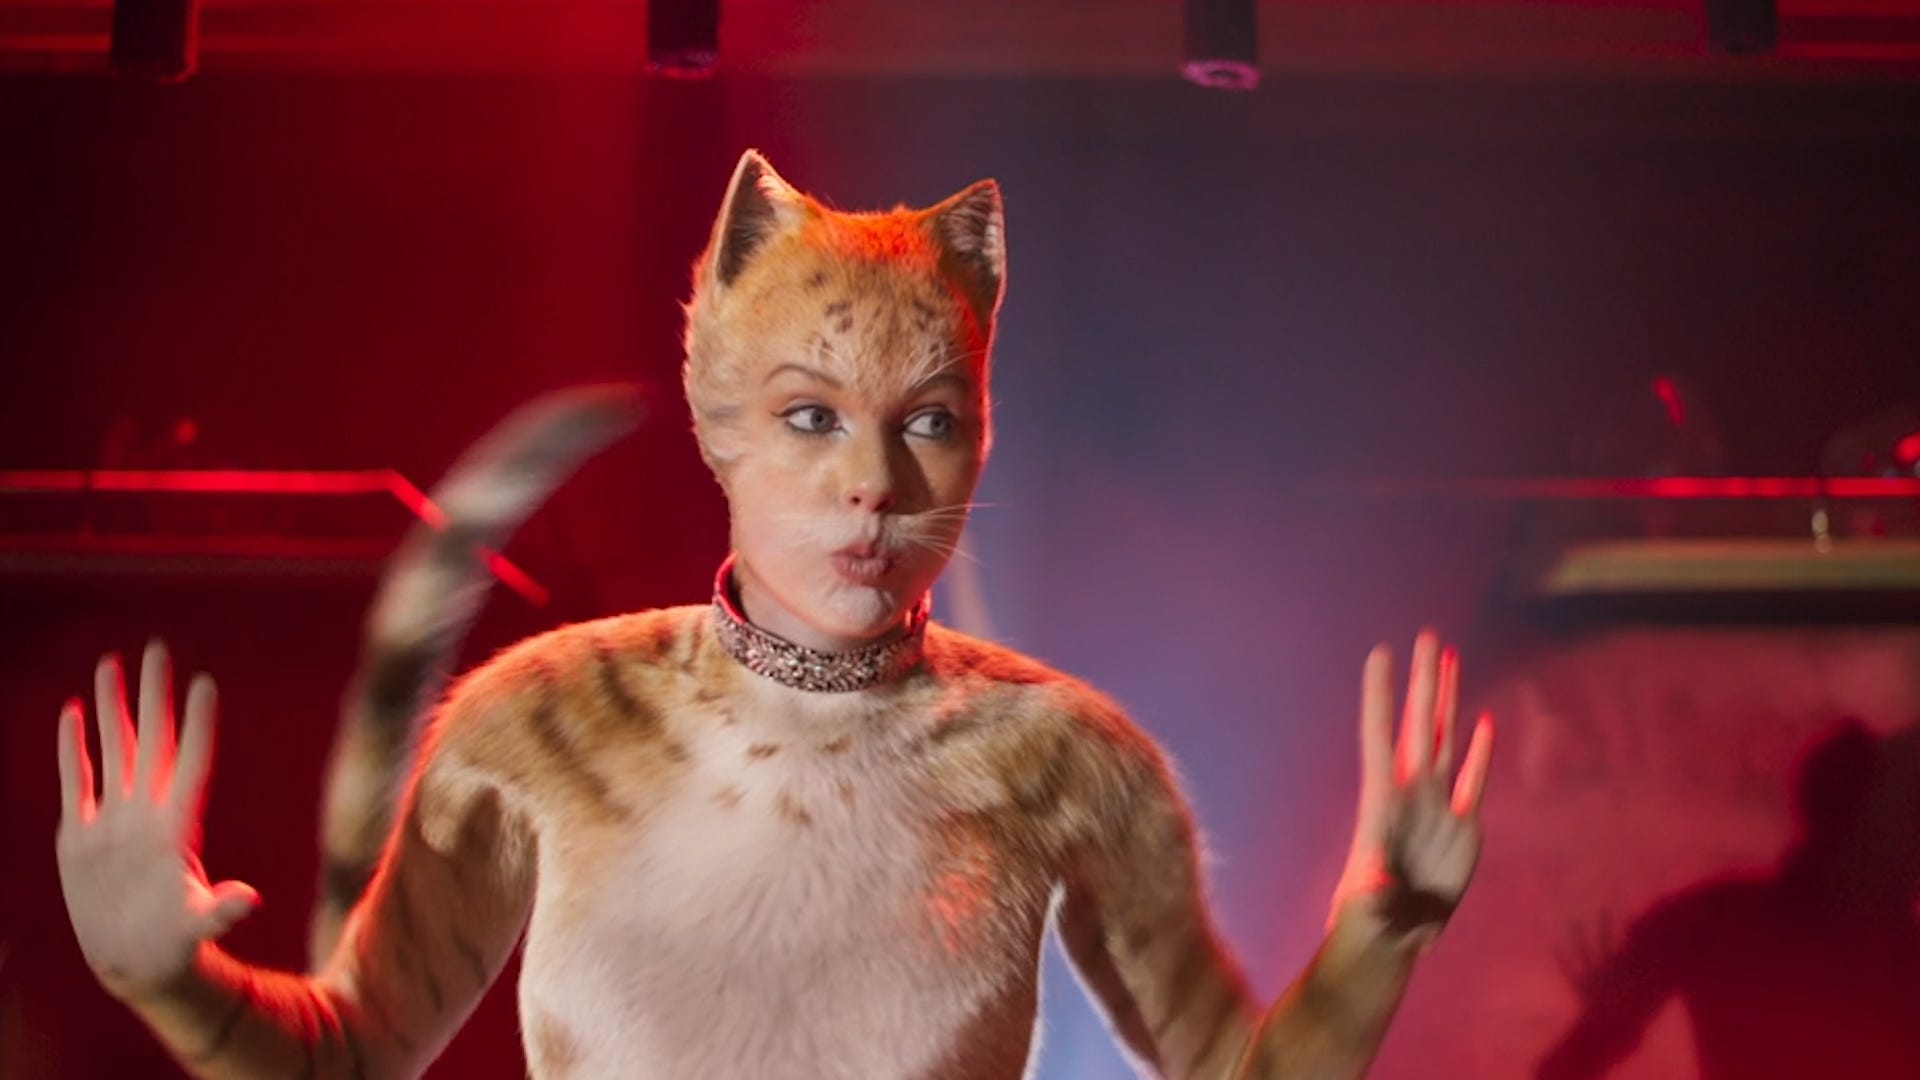 Cats Movie Review Can We Talk About That Digital Fur